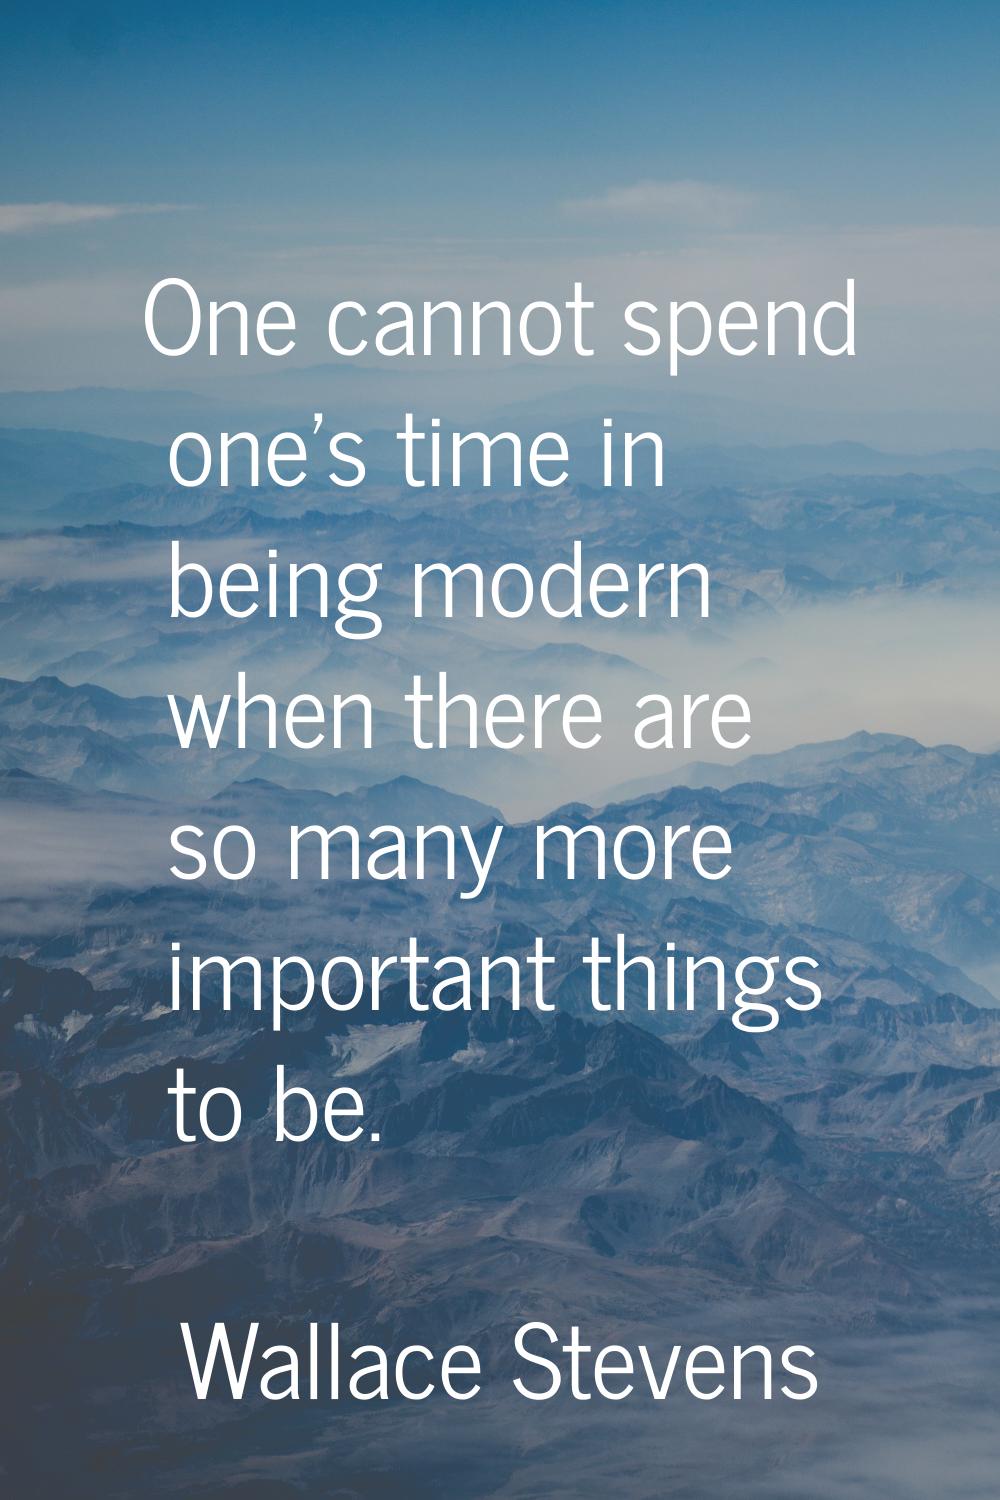 One cannot spend one's time in being modern when there are so many more important things to be.